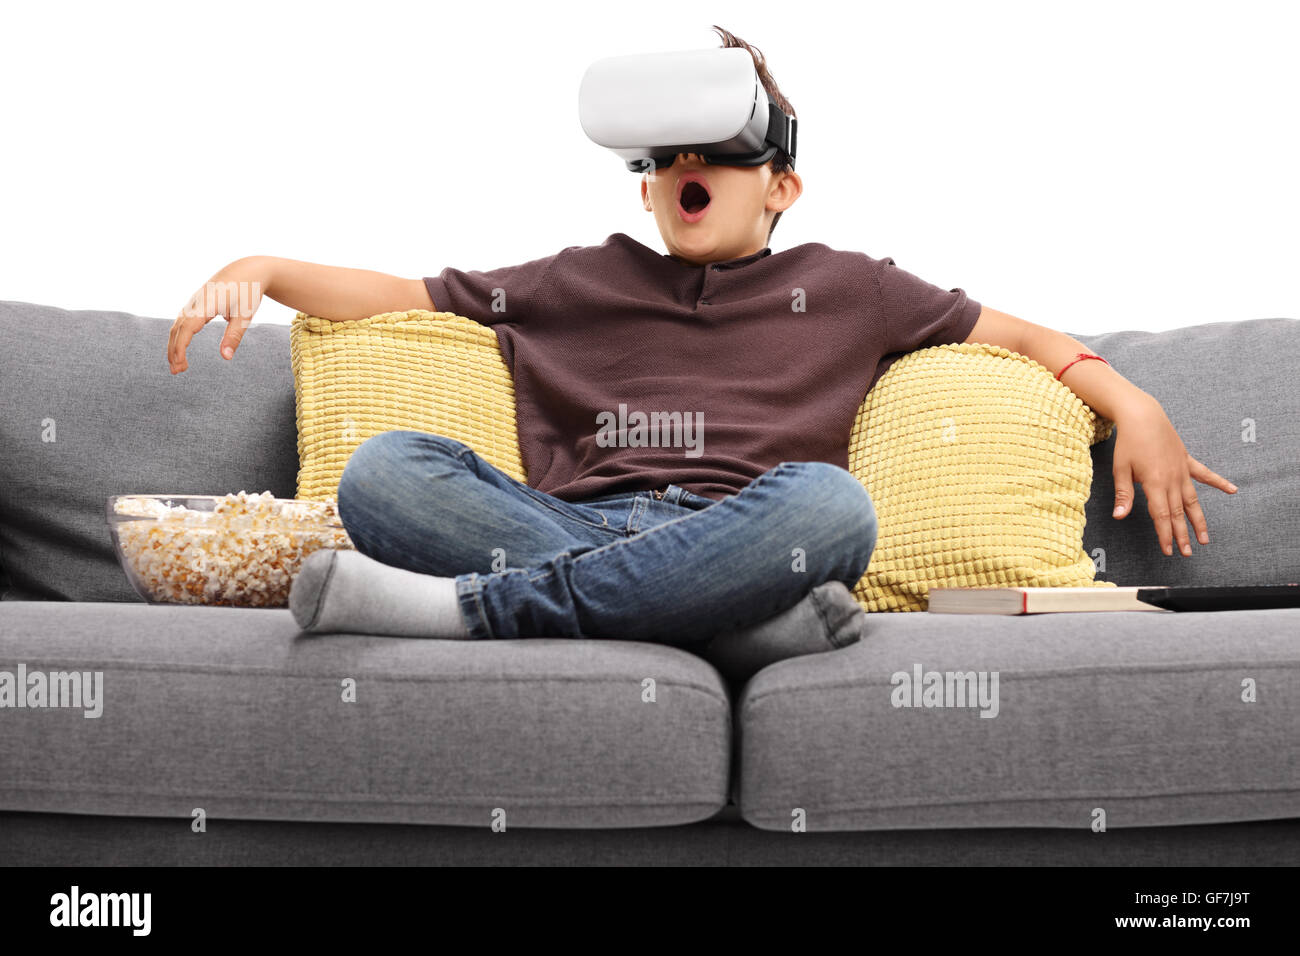 Astounded little kid using virtual reality goggles seated on a sofa isolated on white background Stock Photo